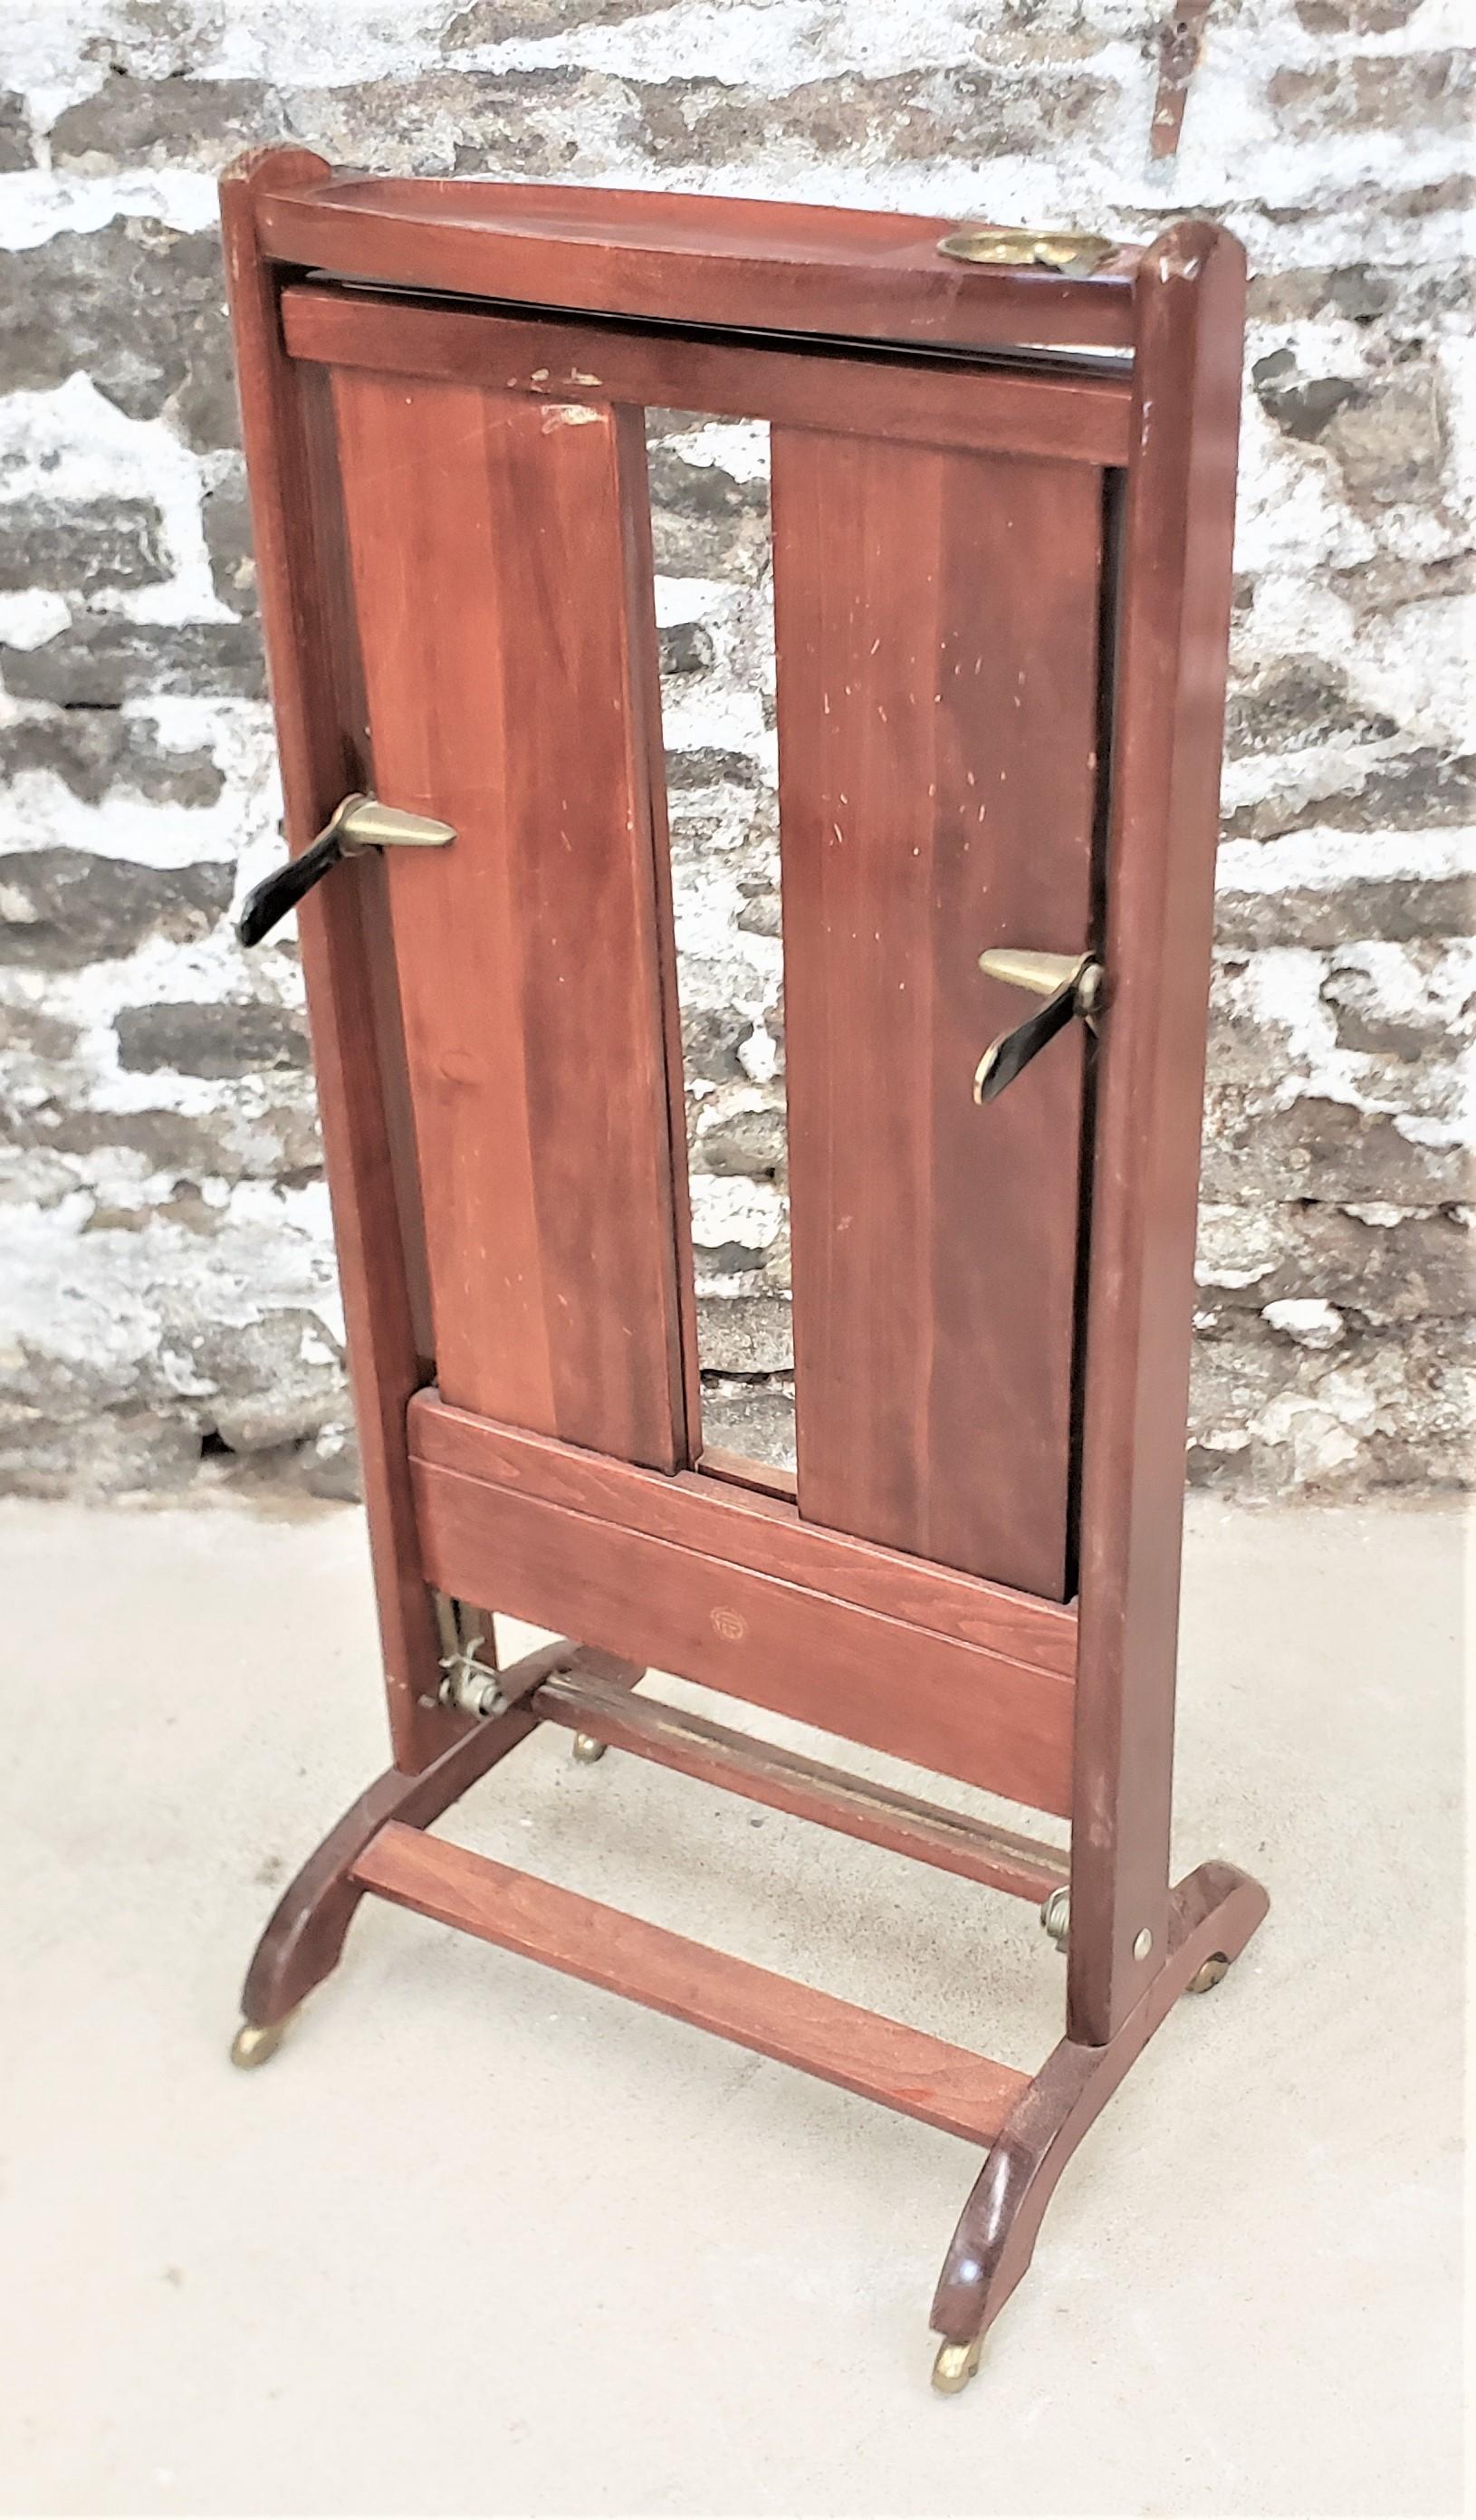 This Mid-Century Modern era wooden men's valet stand was designed by Fratelli Reguitti of Italy in approximately 1960 in the period Mid-Century style. This valet is done in solid wood with a vide poche tray at the top, complete with an inserted